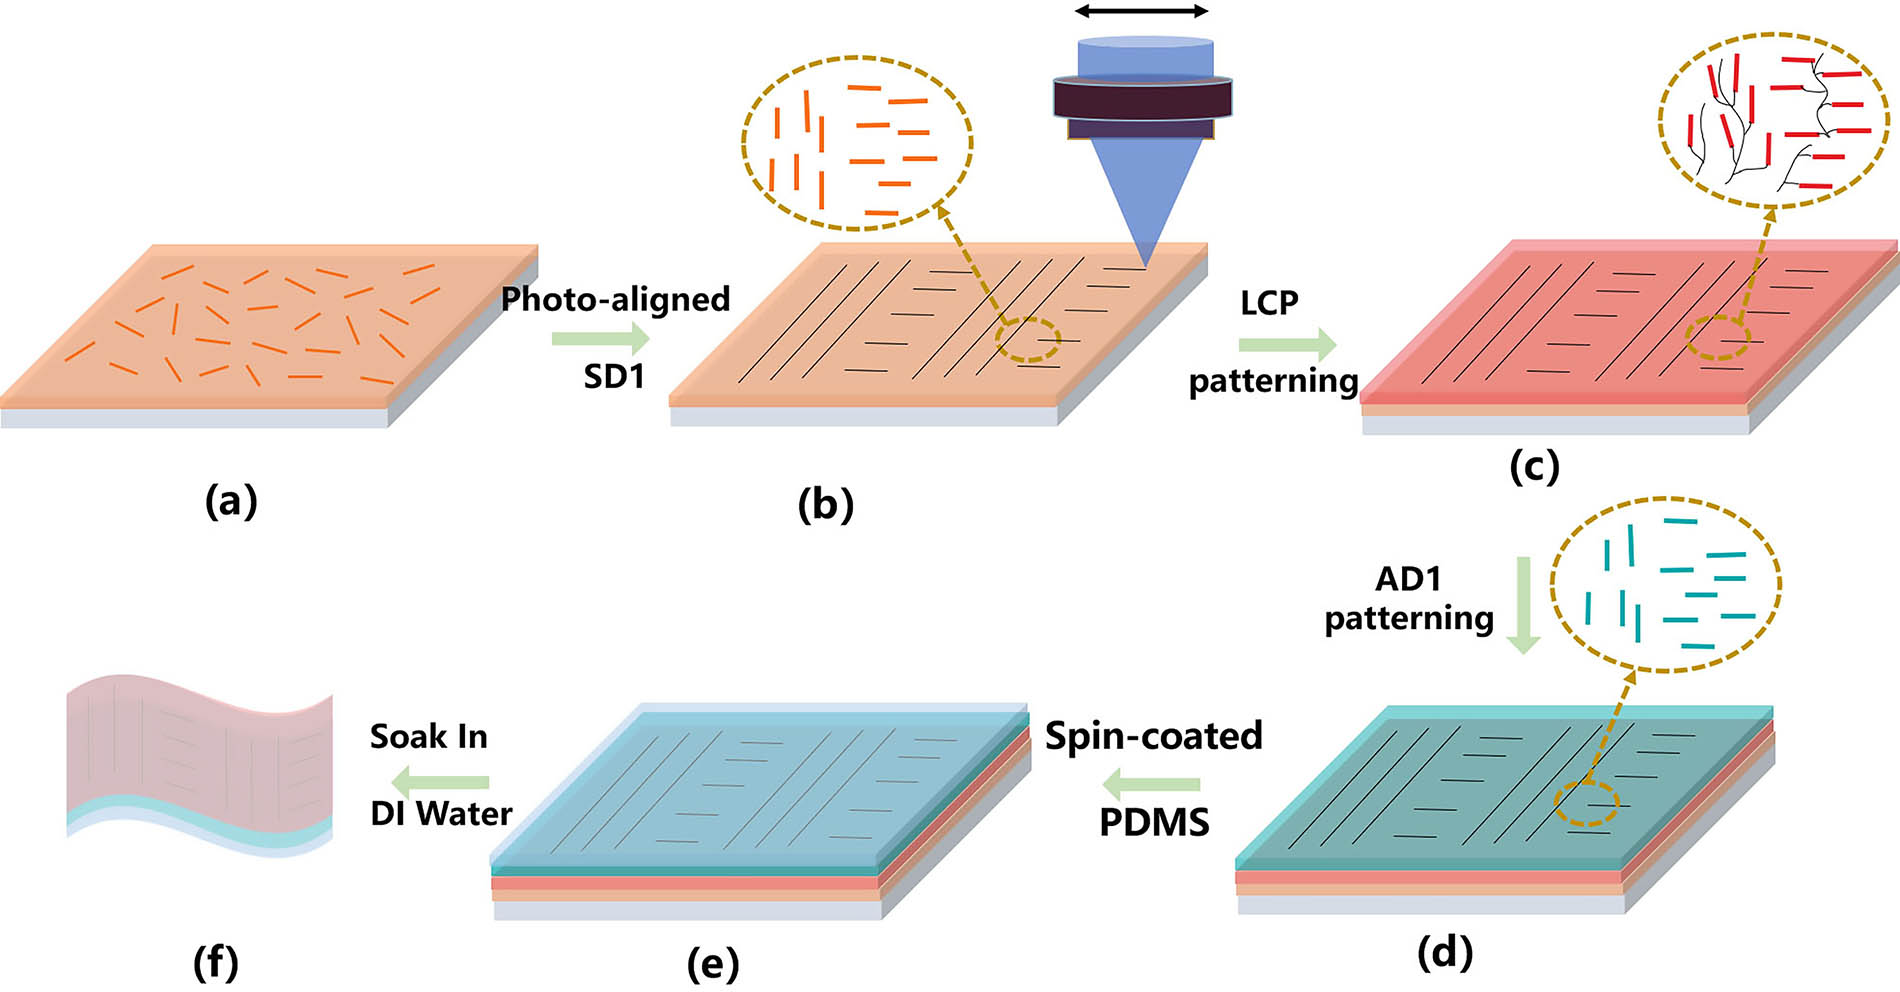 Schematic diagram of the preparation process of a flexible high-resolution patterned polarizer. (a) Photoalignment layer is spin-coated onto a quartz substrate. (b) Regions of the photoalignment layer are aligned using laser writing. (c) Liquid crystal precursor is spin-coated on top of SD1. (d) Spin-coated AD1s solution; (e) spin-coated PDMS; (f) flexible patterned polarizer.